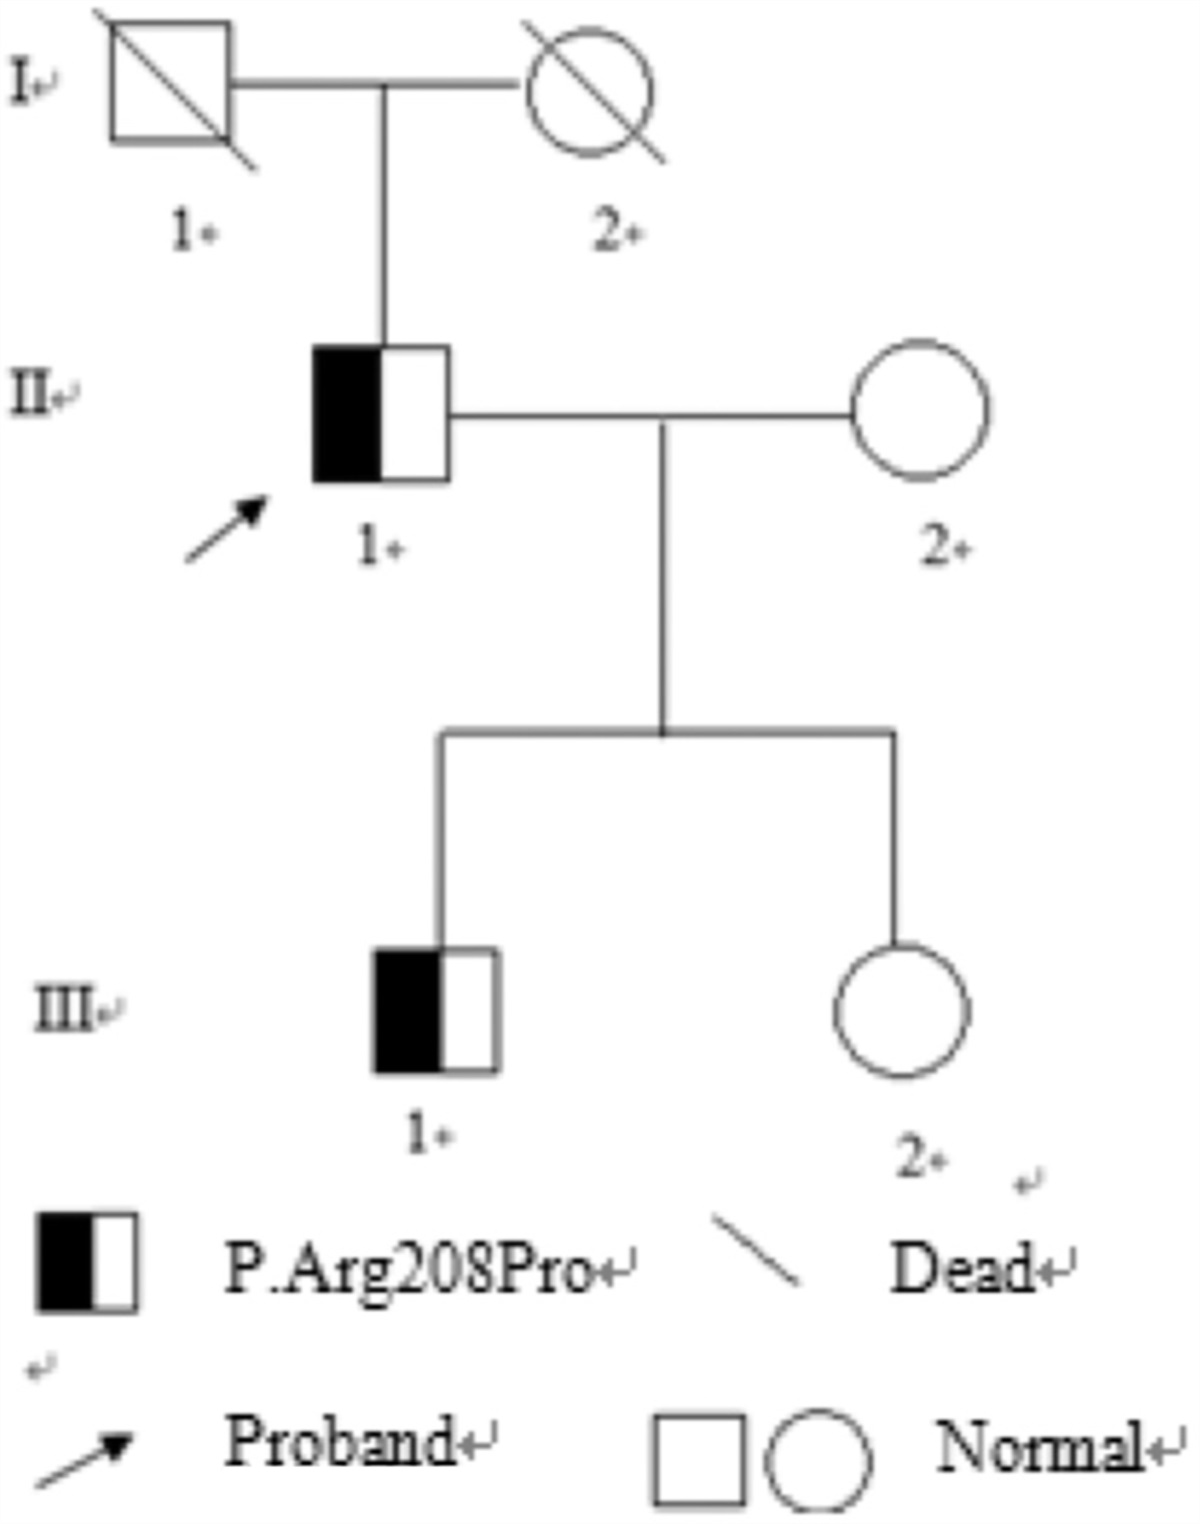 A novel F13A1 gene mutation (Arg208Pro) in a Chinese patient with factor XIII deficiency